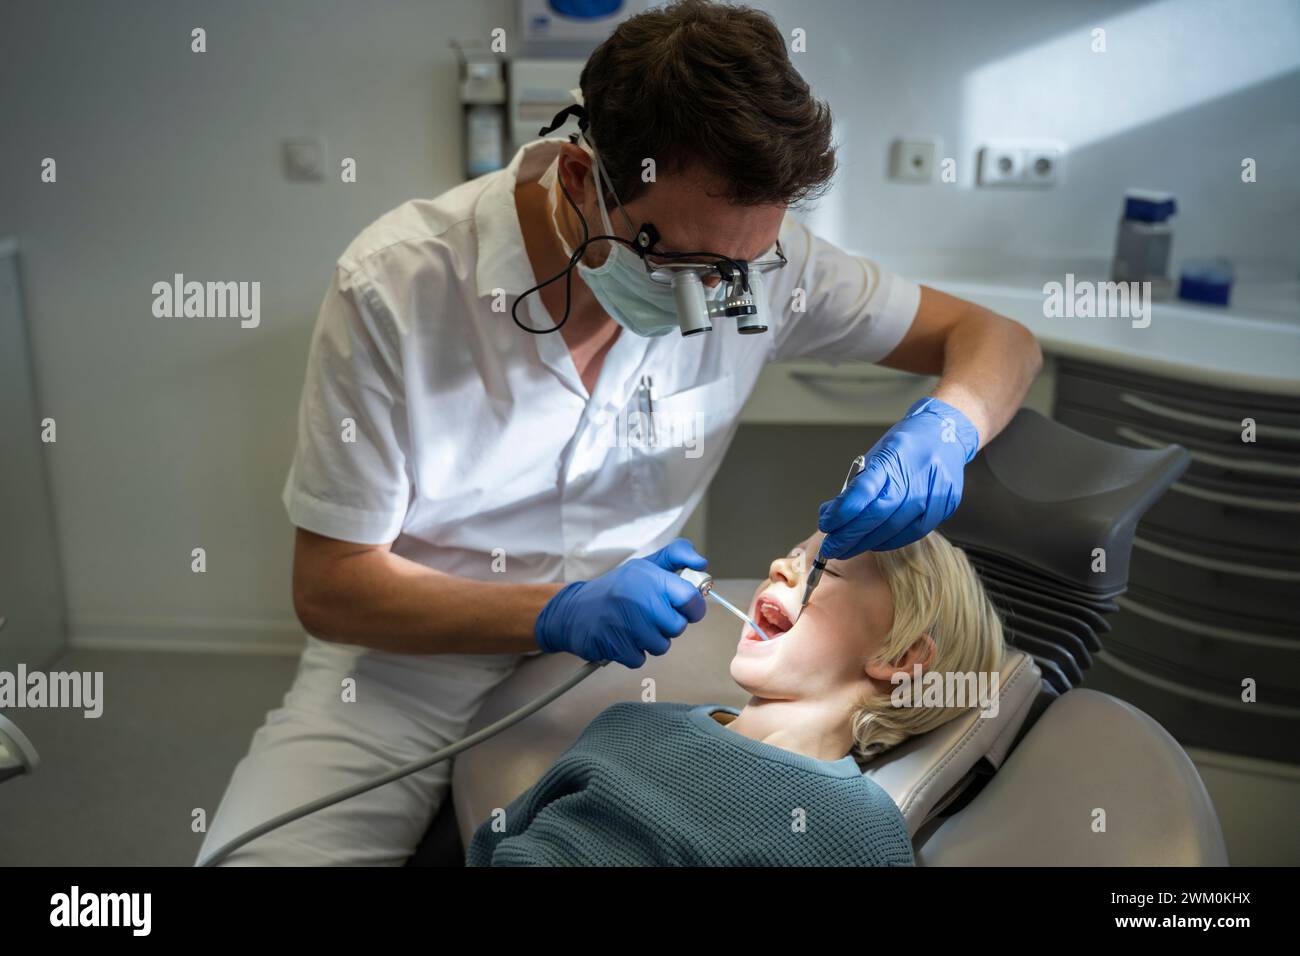 Dentist examining patient with medical equipment in clinic Stock Photo